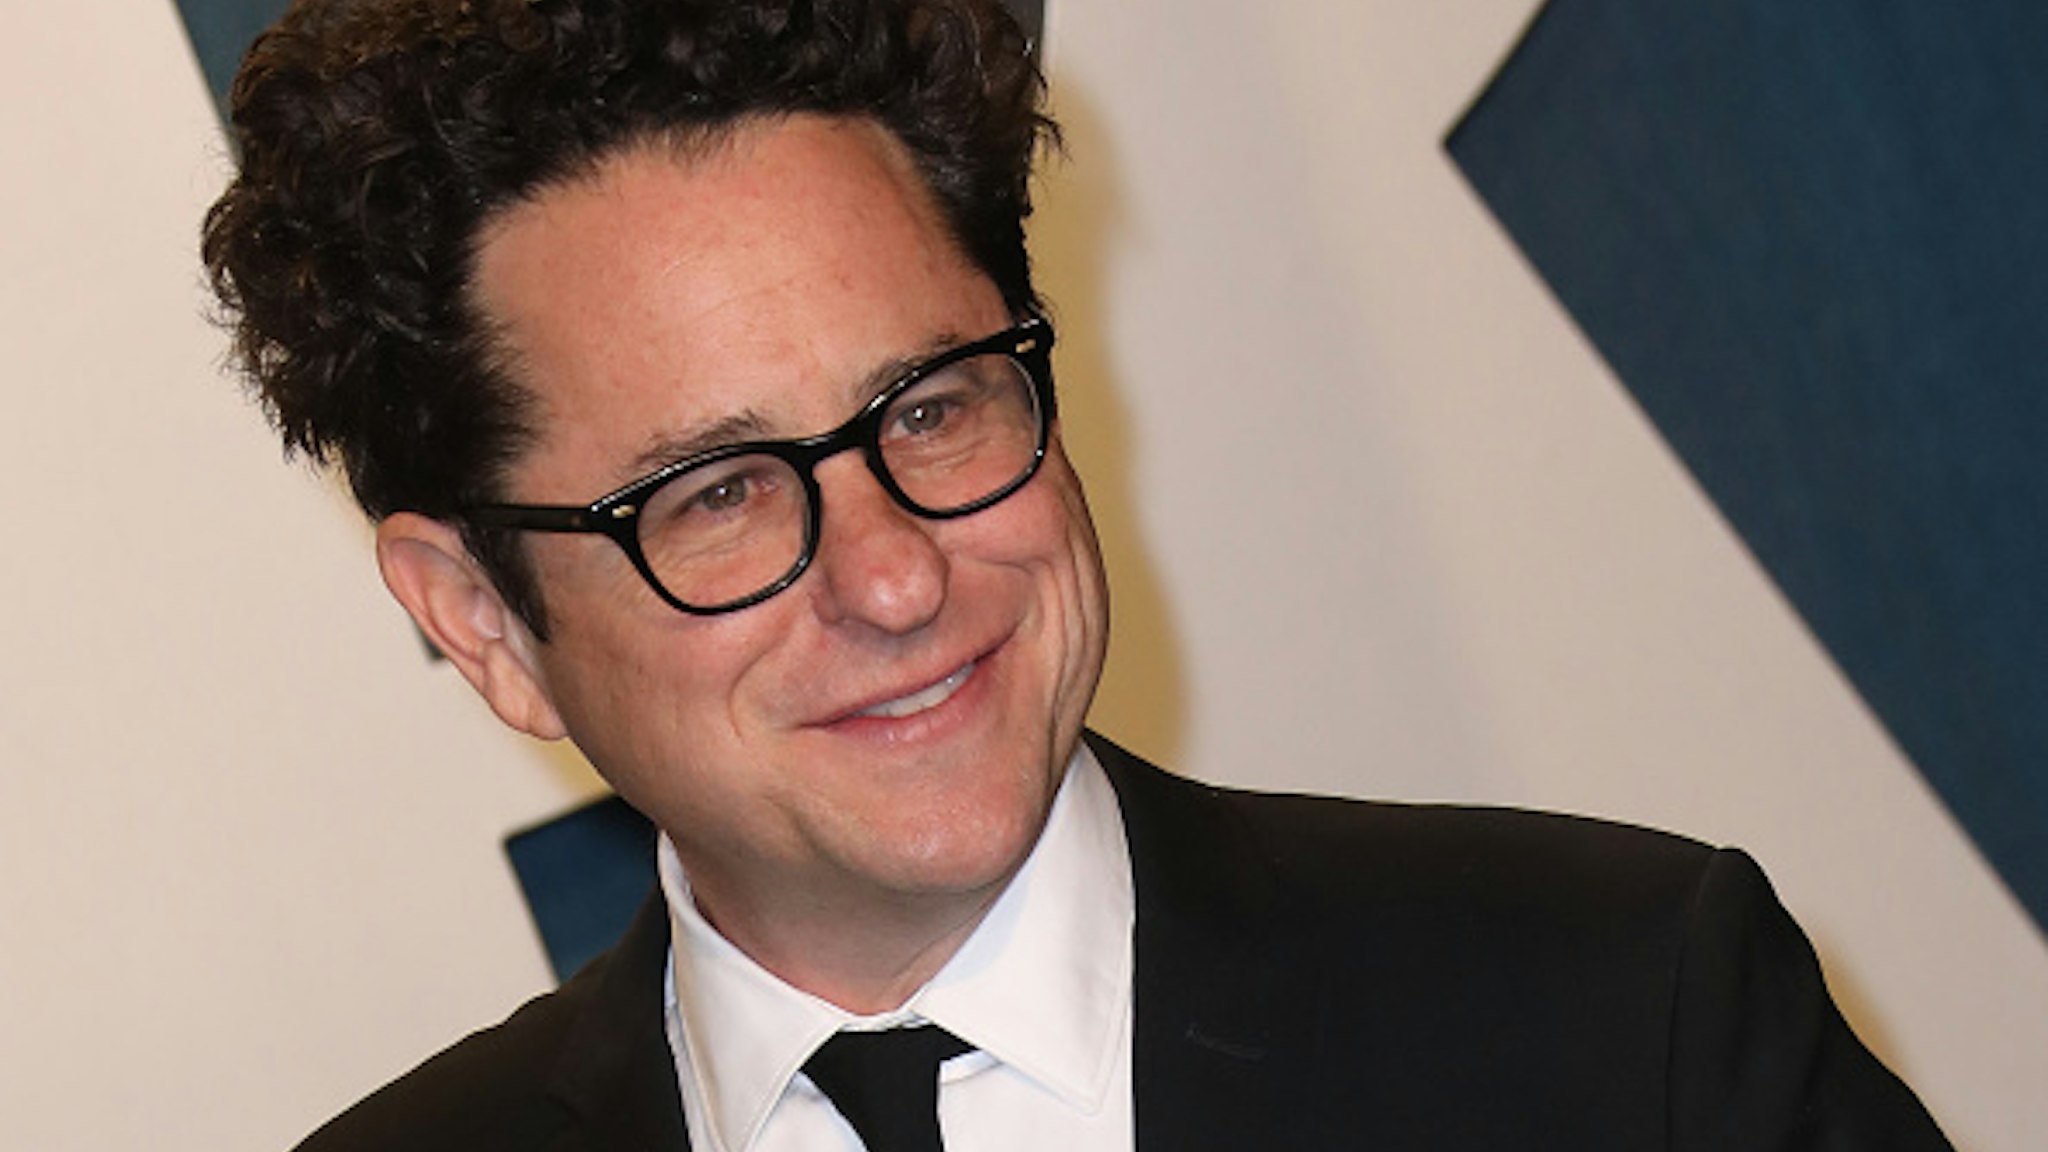 BEVERLY HILLS, CALIFORNIA - FEBRUARY 09: J.J. Abrams attends the 2020 Vanity Fair Oscar Party at Wallis Annenberg Center for the Performing Arts on February 09, 2020 in Beverly Hills, California.